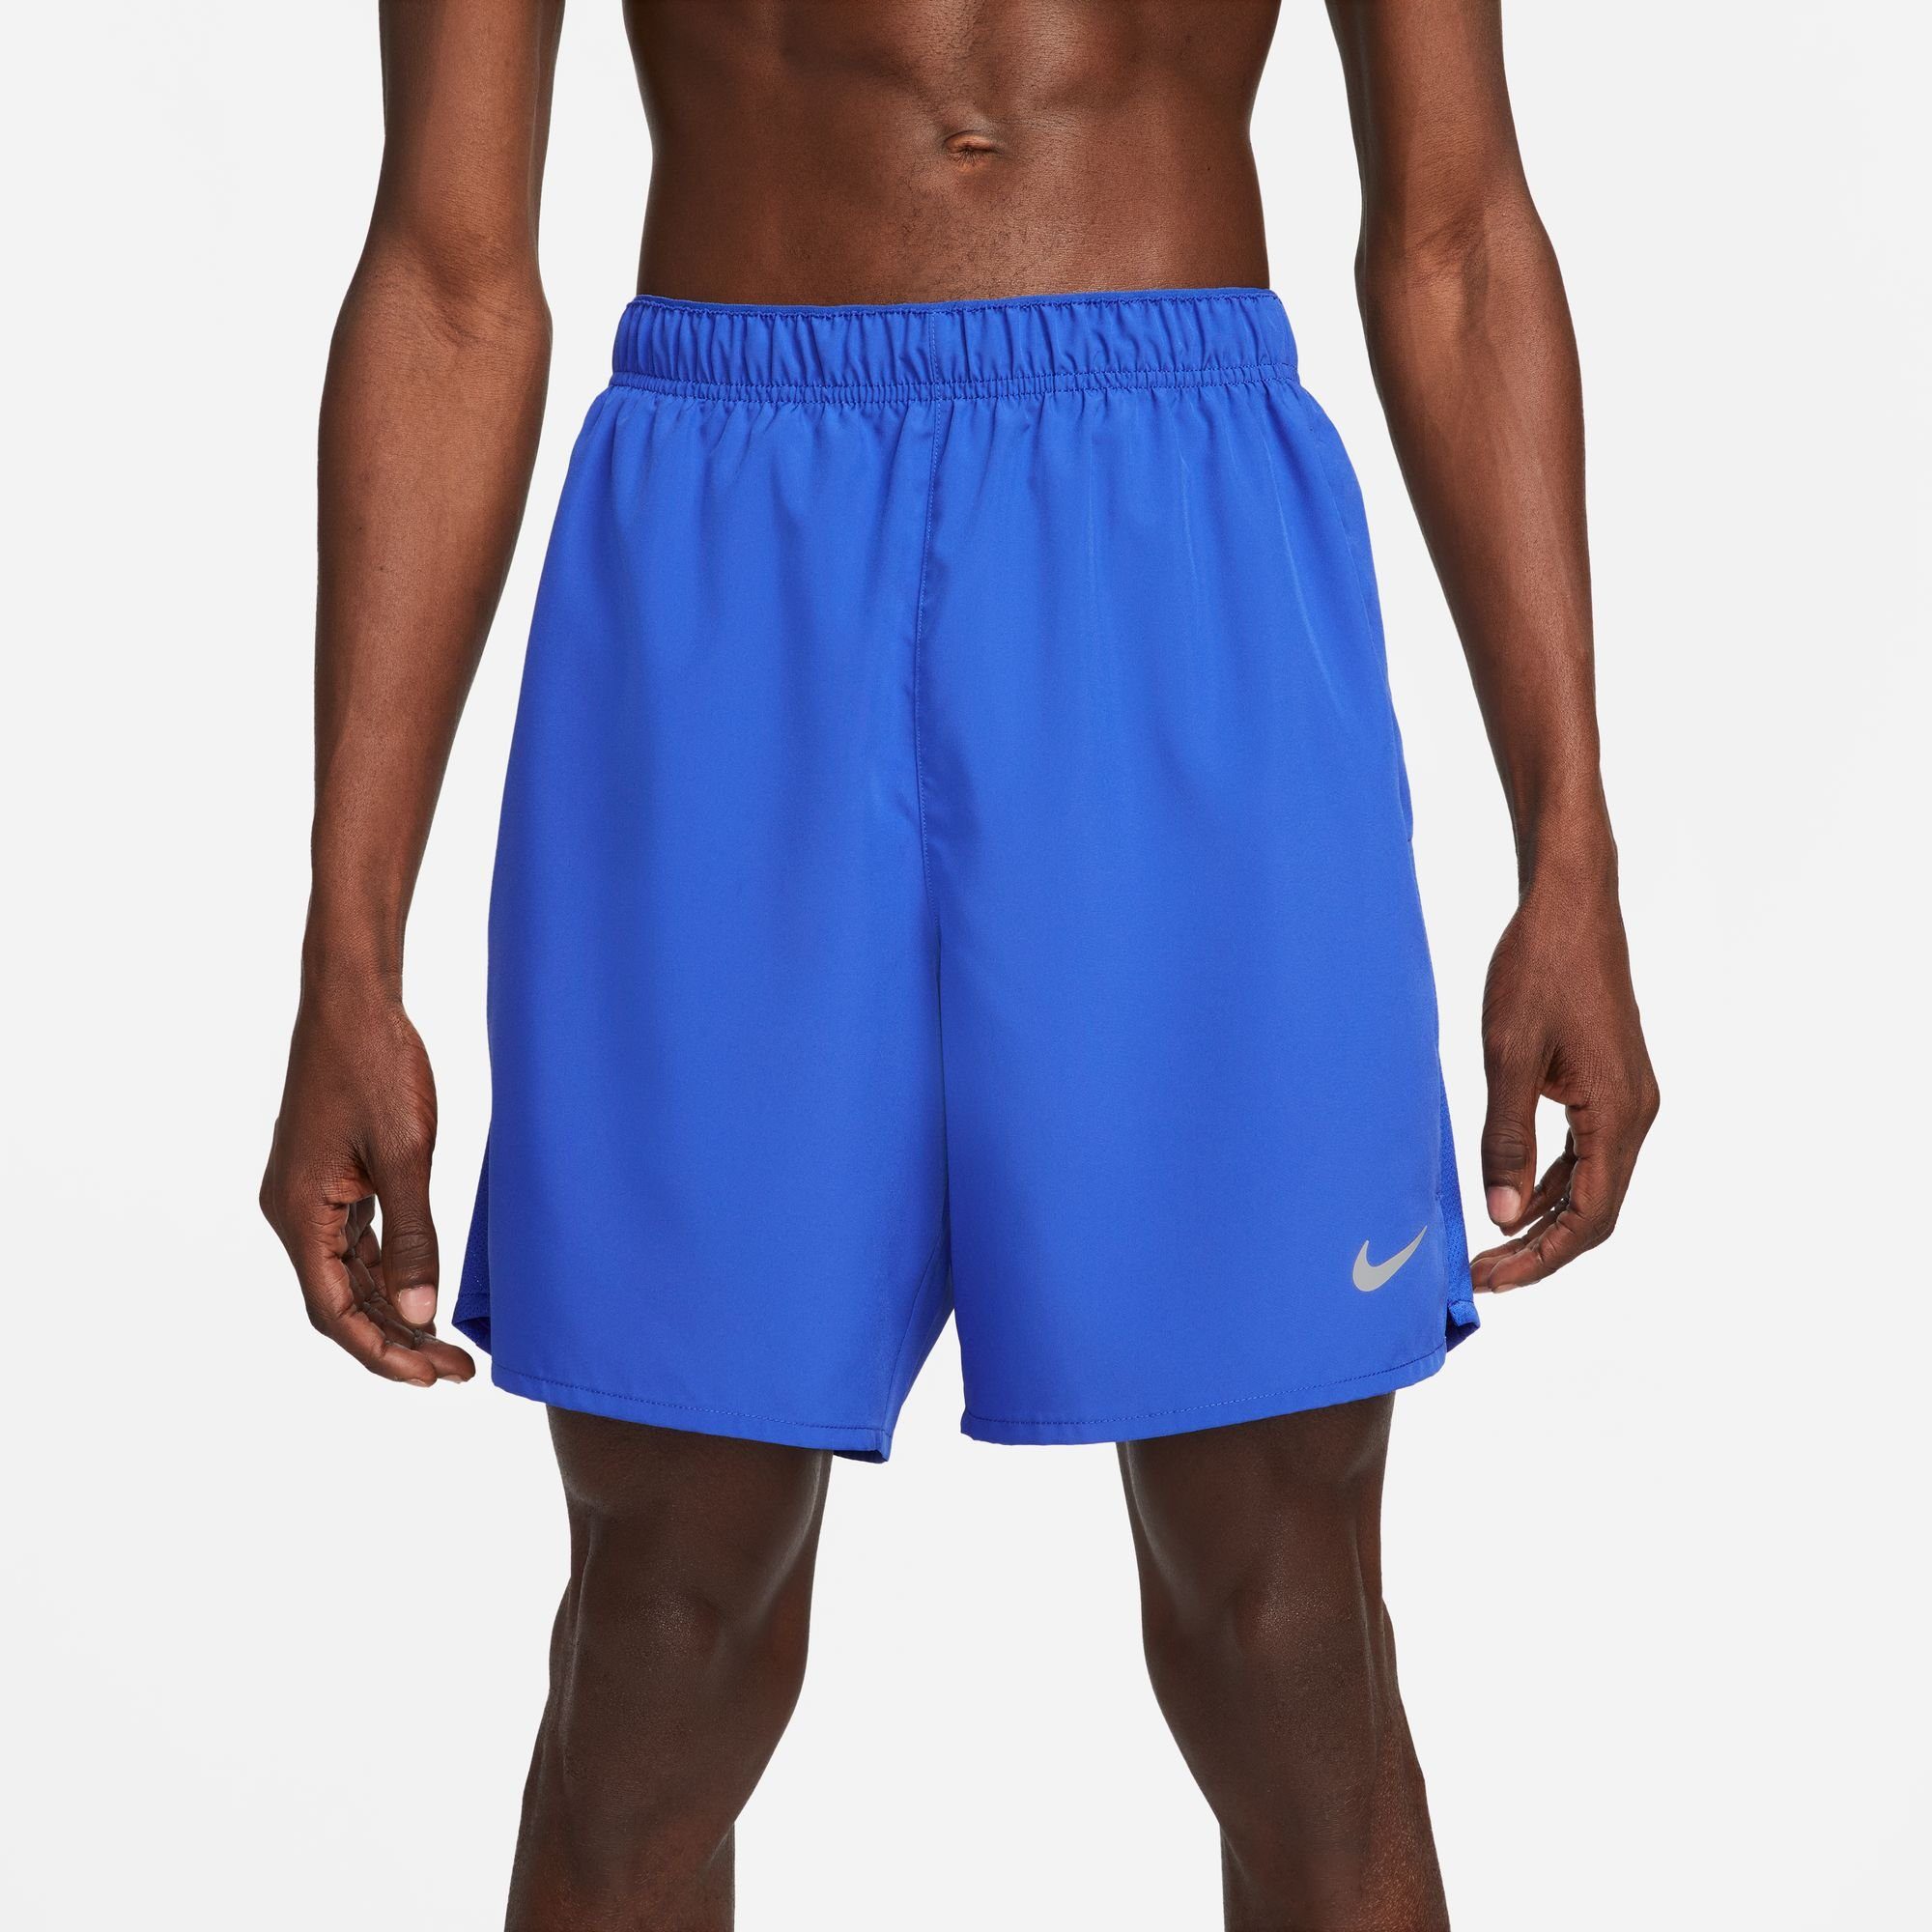 UNLINED SILV Laufshorts SHORTS RUNNING MEN'S DRI-FIT CHALLENGER ROYAL/REFLECTIVE GAME ROYAL/GAME Nike